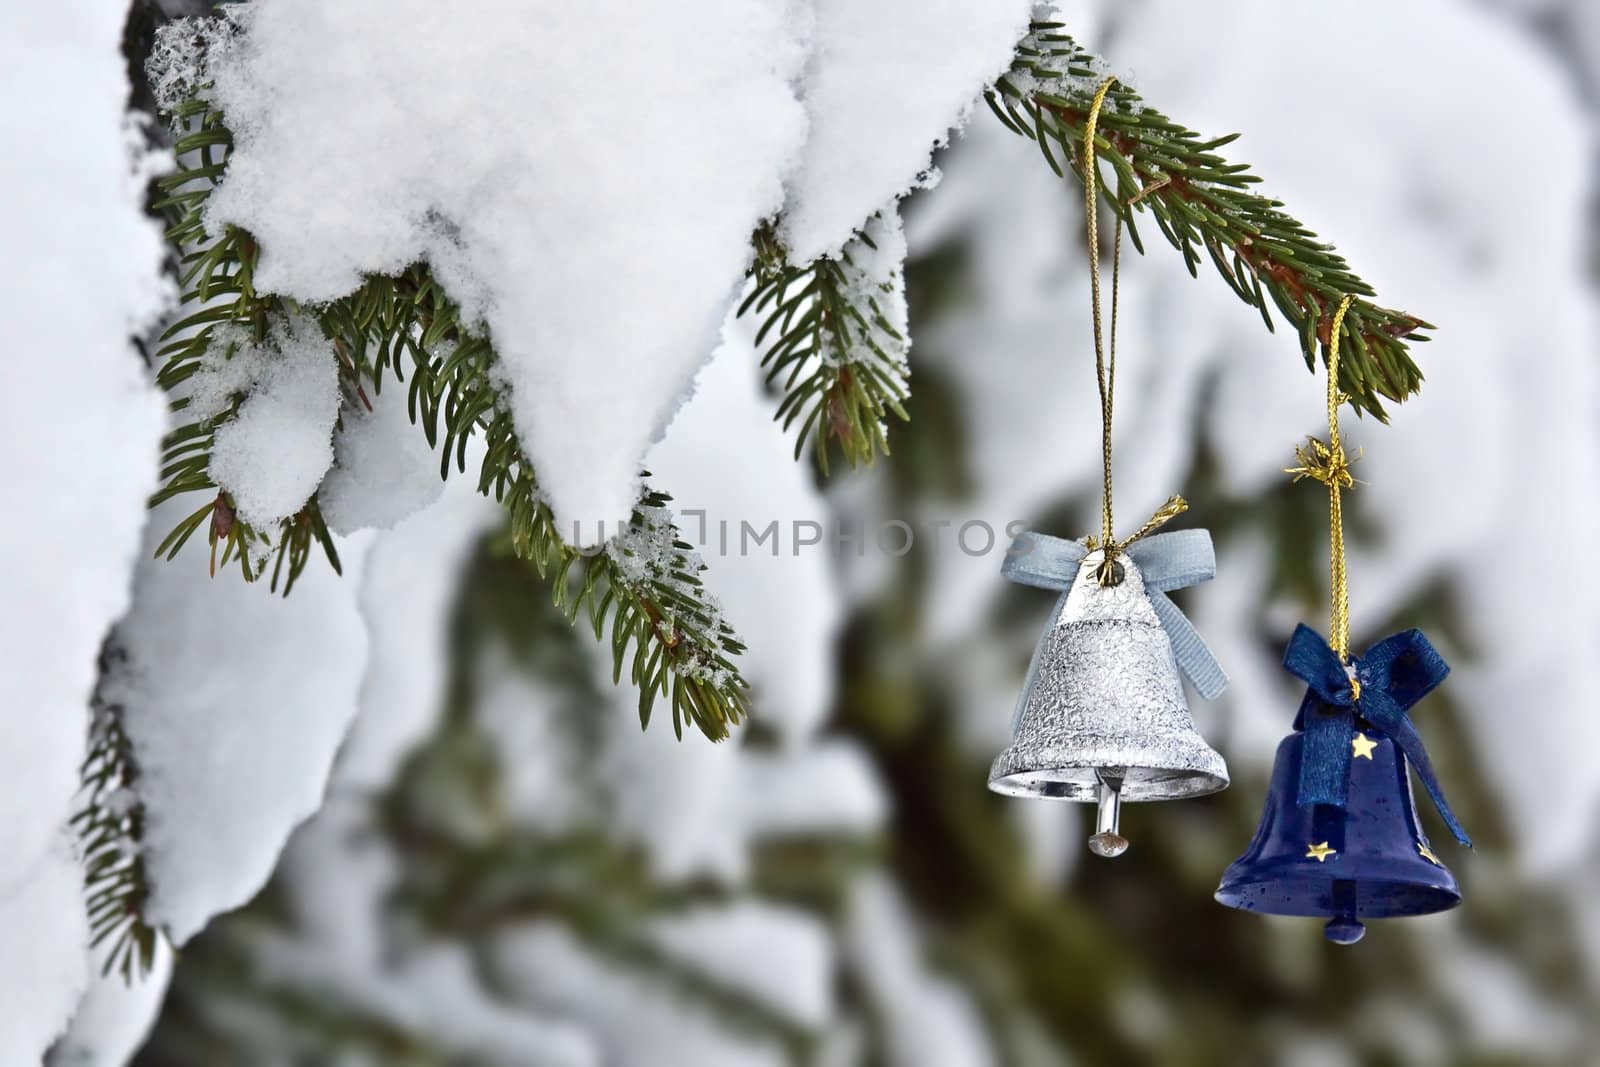 This image shows two little bells for a Christmas Tree